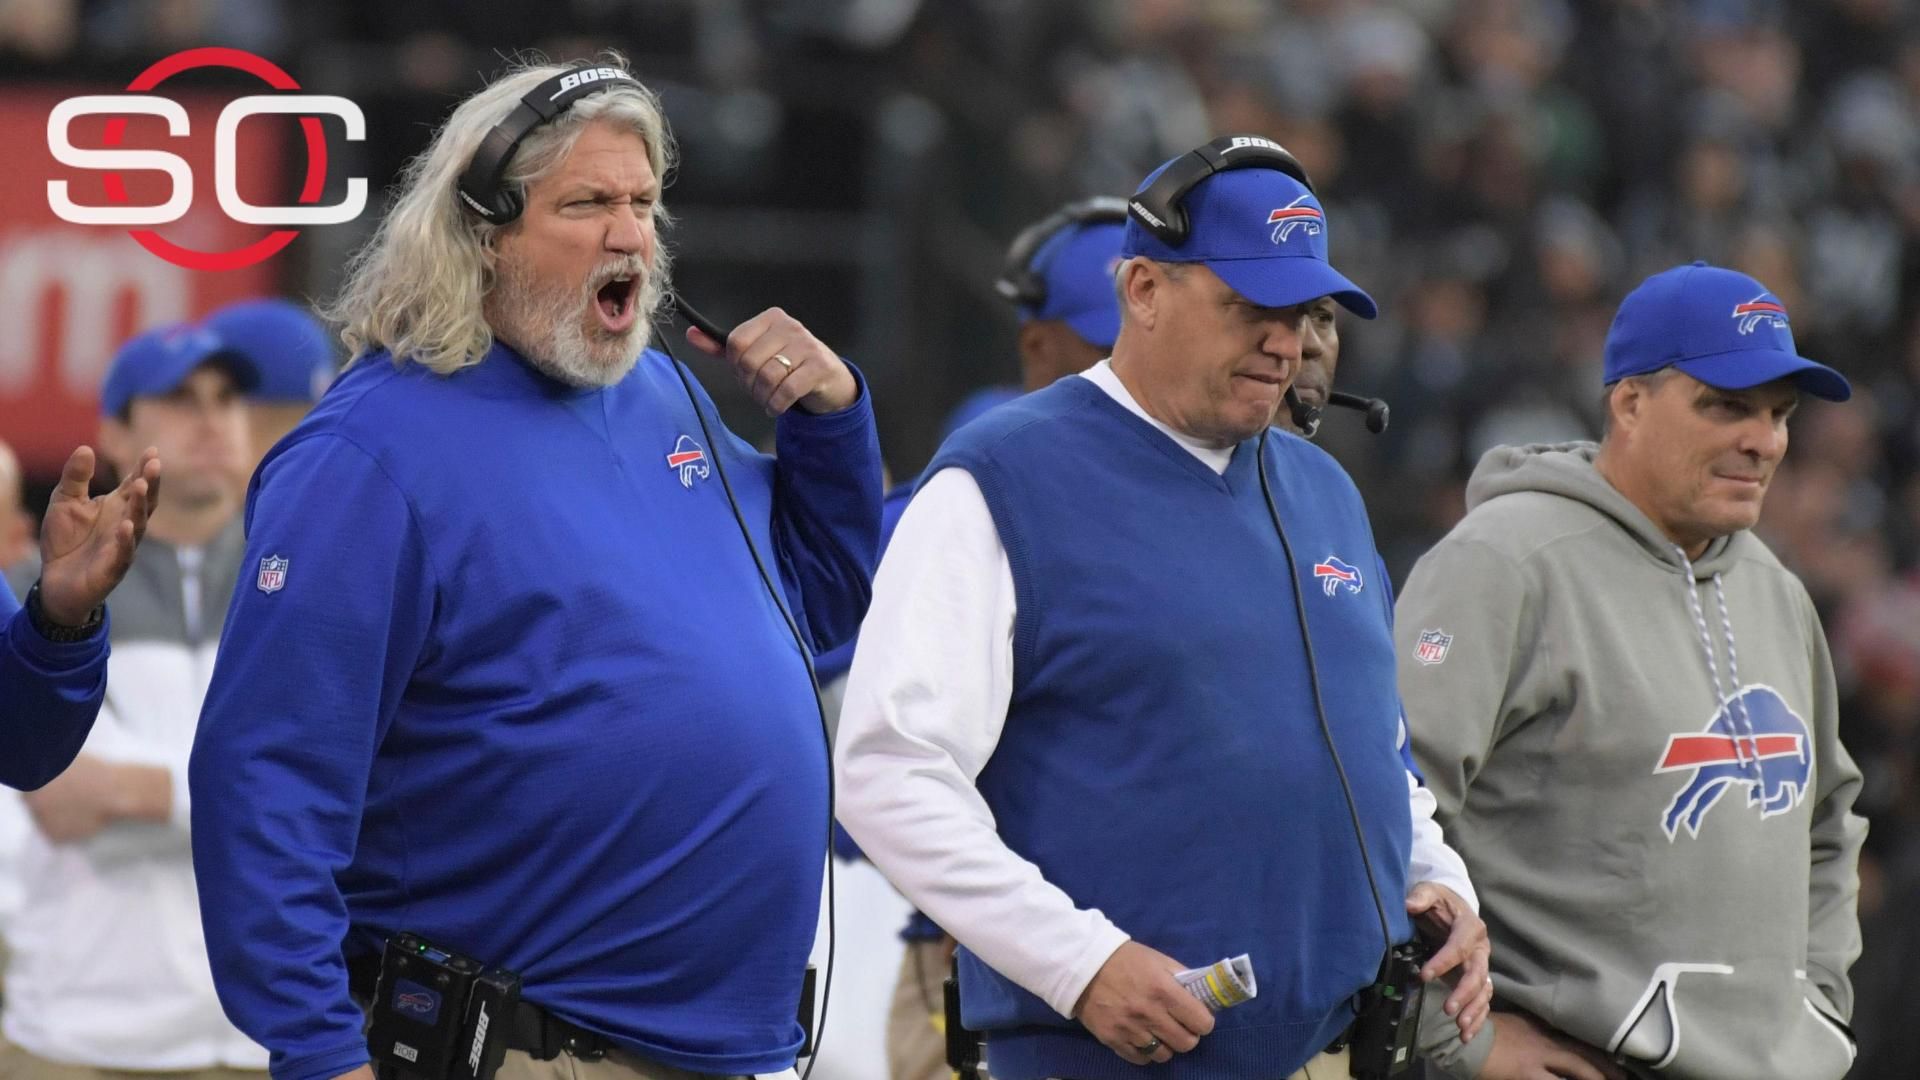 Bills' OT loss likely behind timing for Ryan brothers' firing